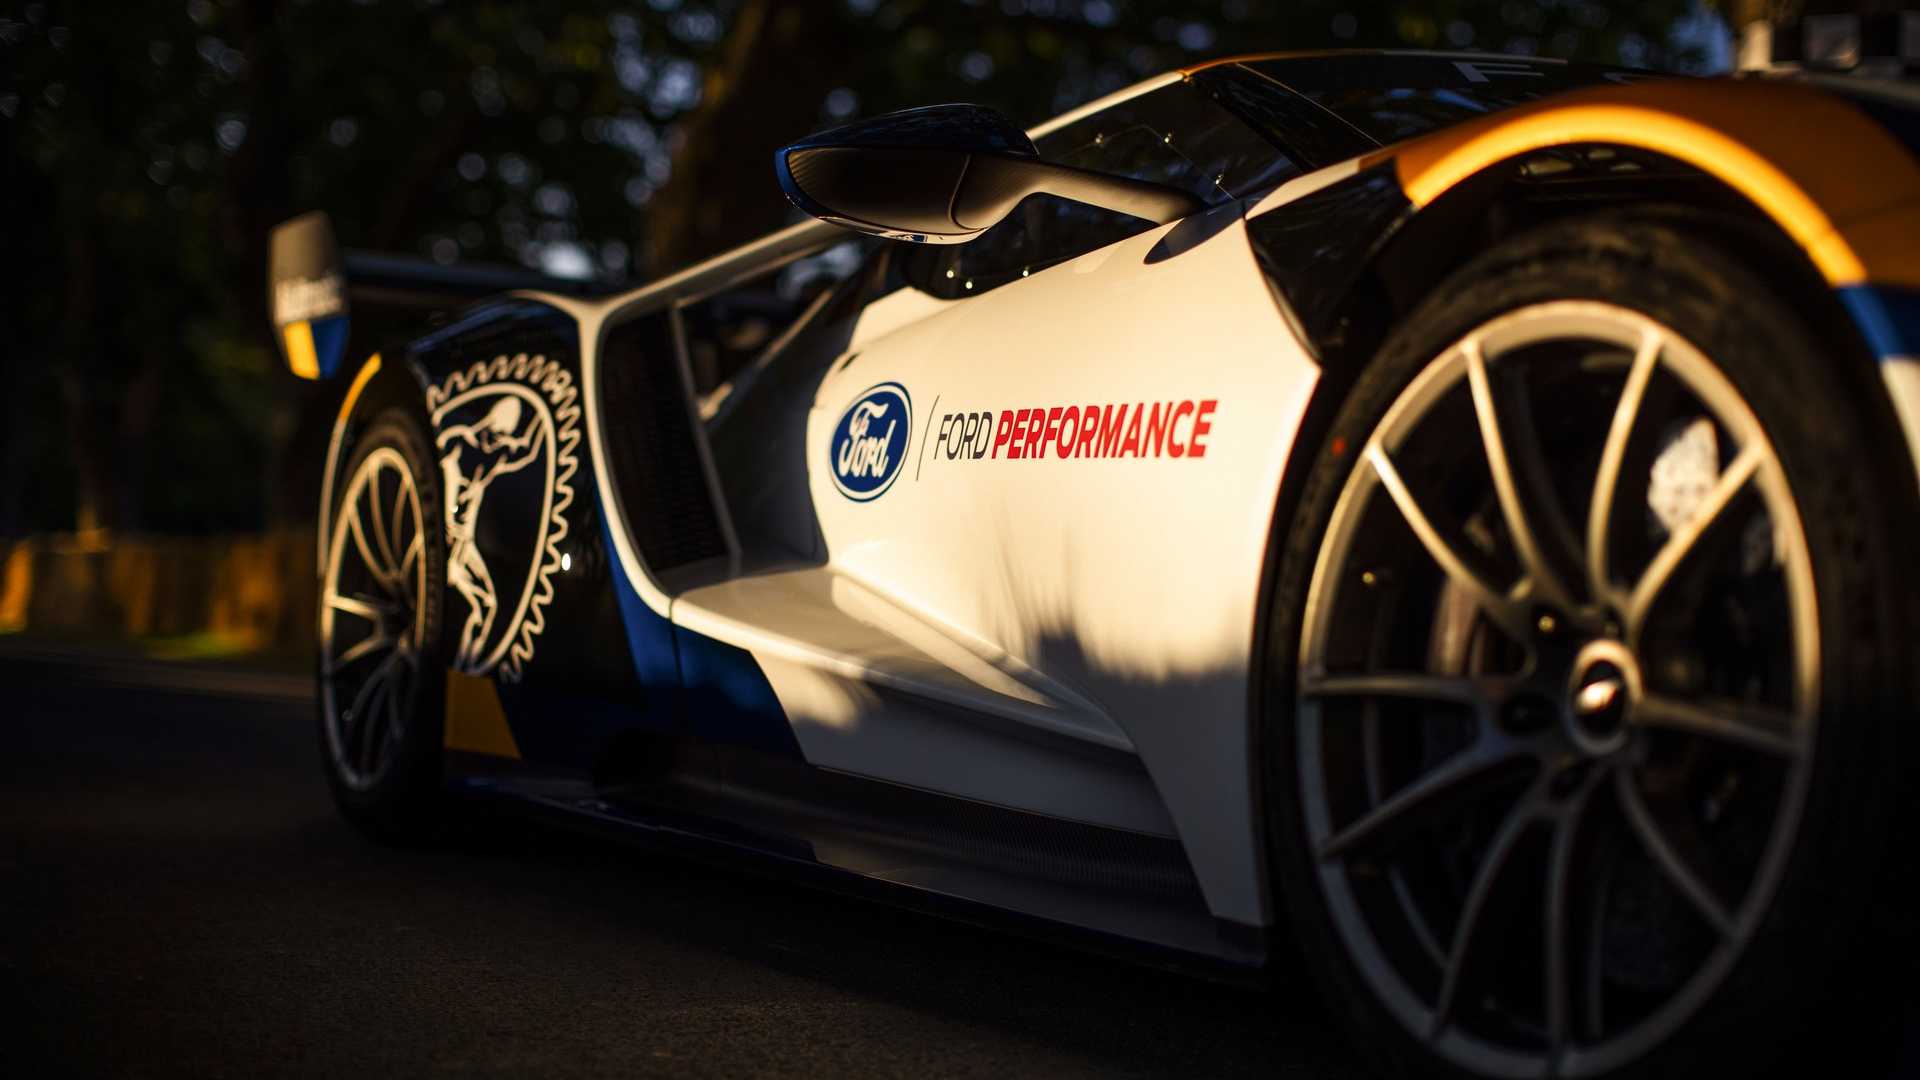 Ford GT Mk II Livery Is Actually Paint, Not Decals